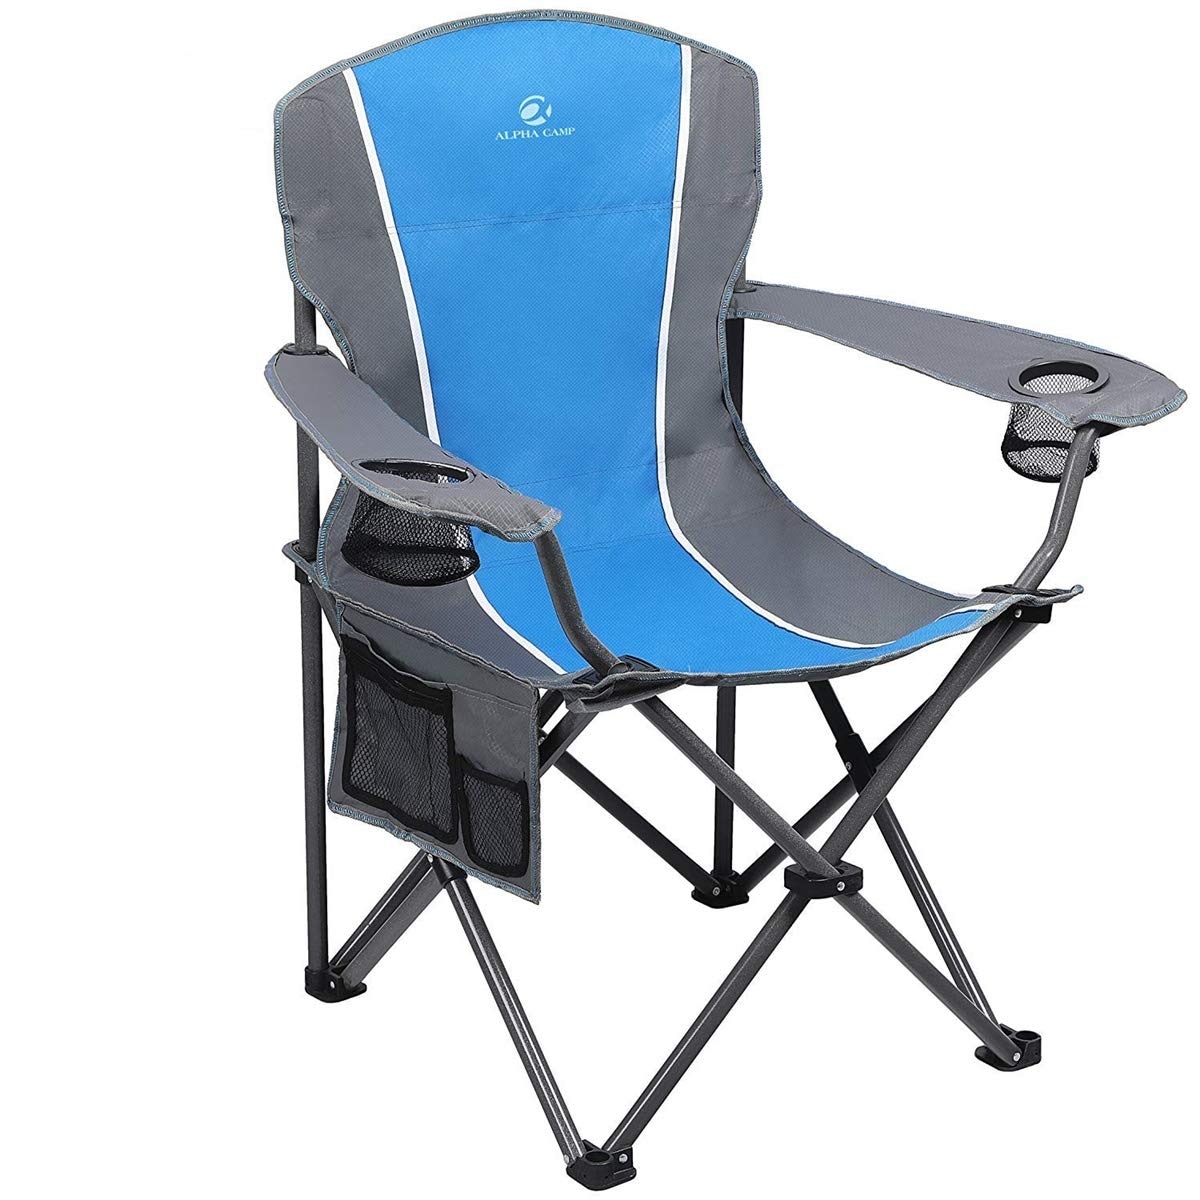 ALPHA CAMP Oversized Camping Folding Chair, Heavy Duty Support 450 LBS  Steel Frame Collapsible Padded Arm Chair with Cup Holder Quad Lumbar Back